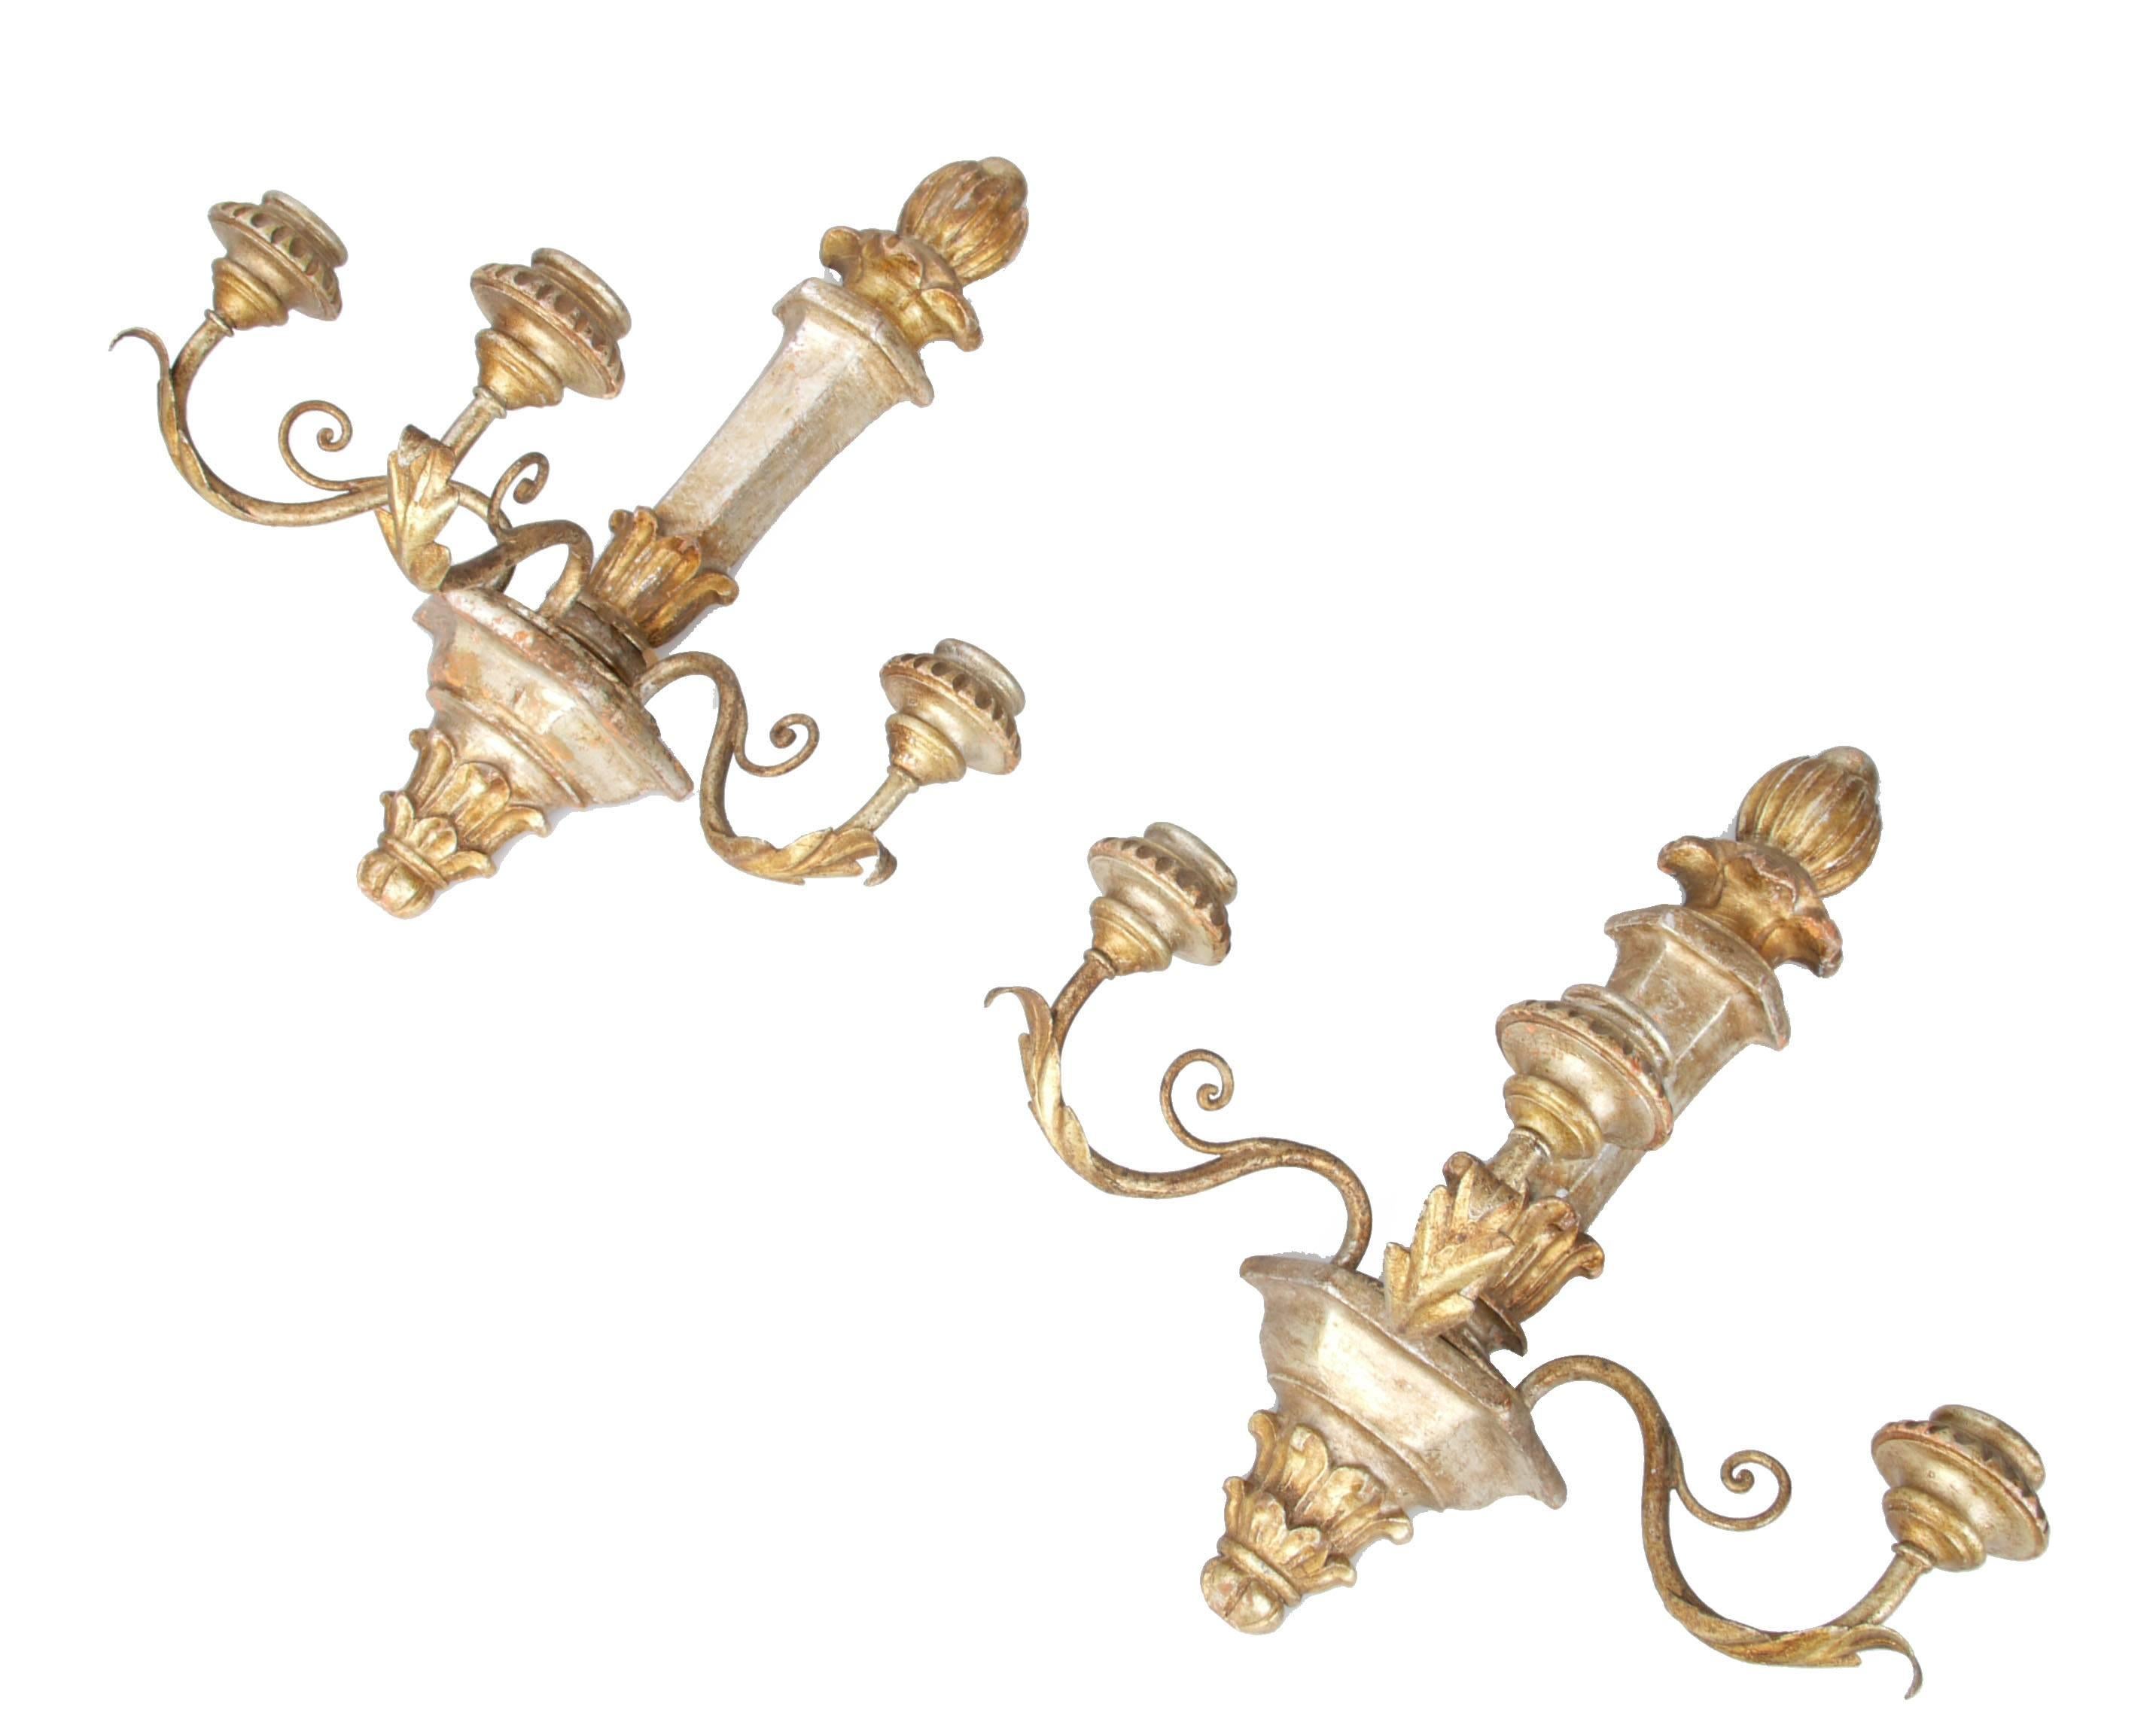 Offered is a pair of three-arm non electrified wooden wall sconces. The candle arms are metal with a golden finish.
Can be easily mounted to the wall.